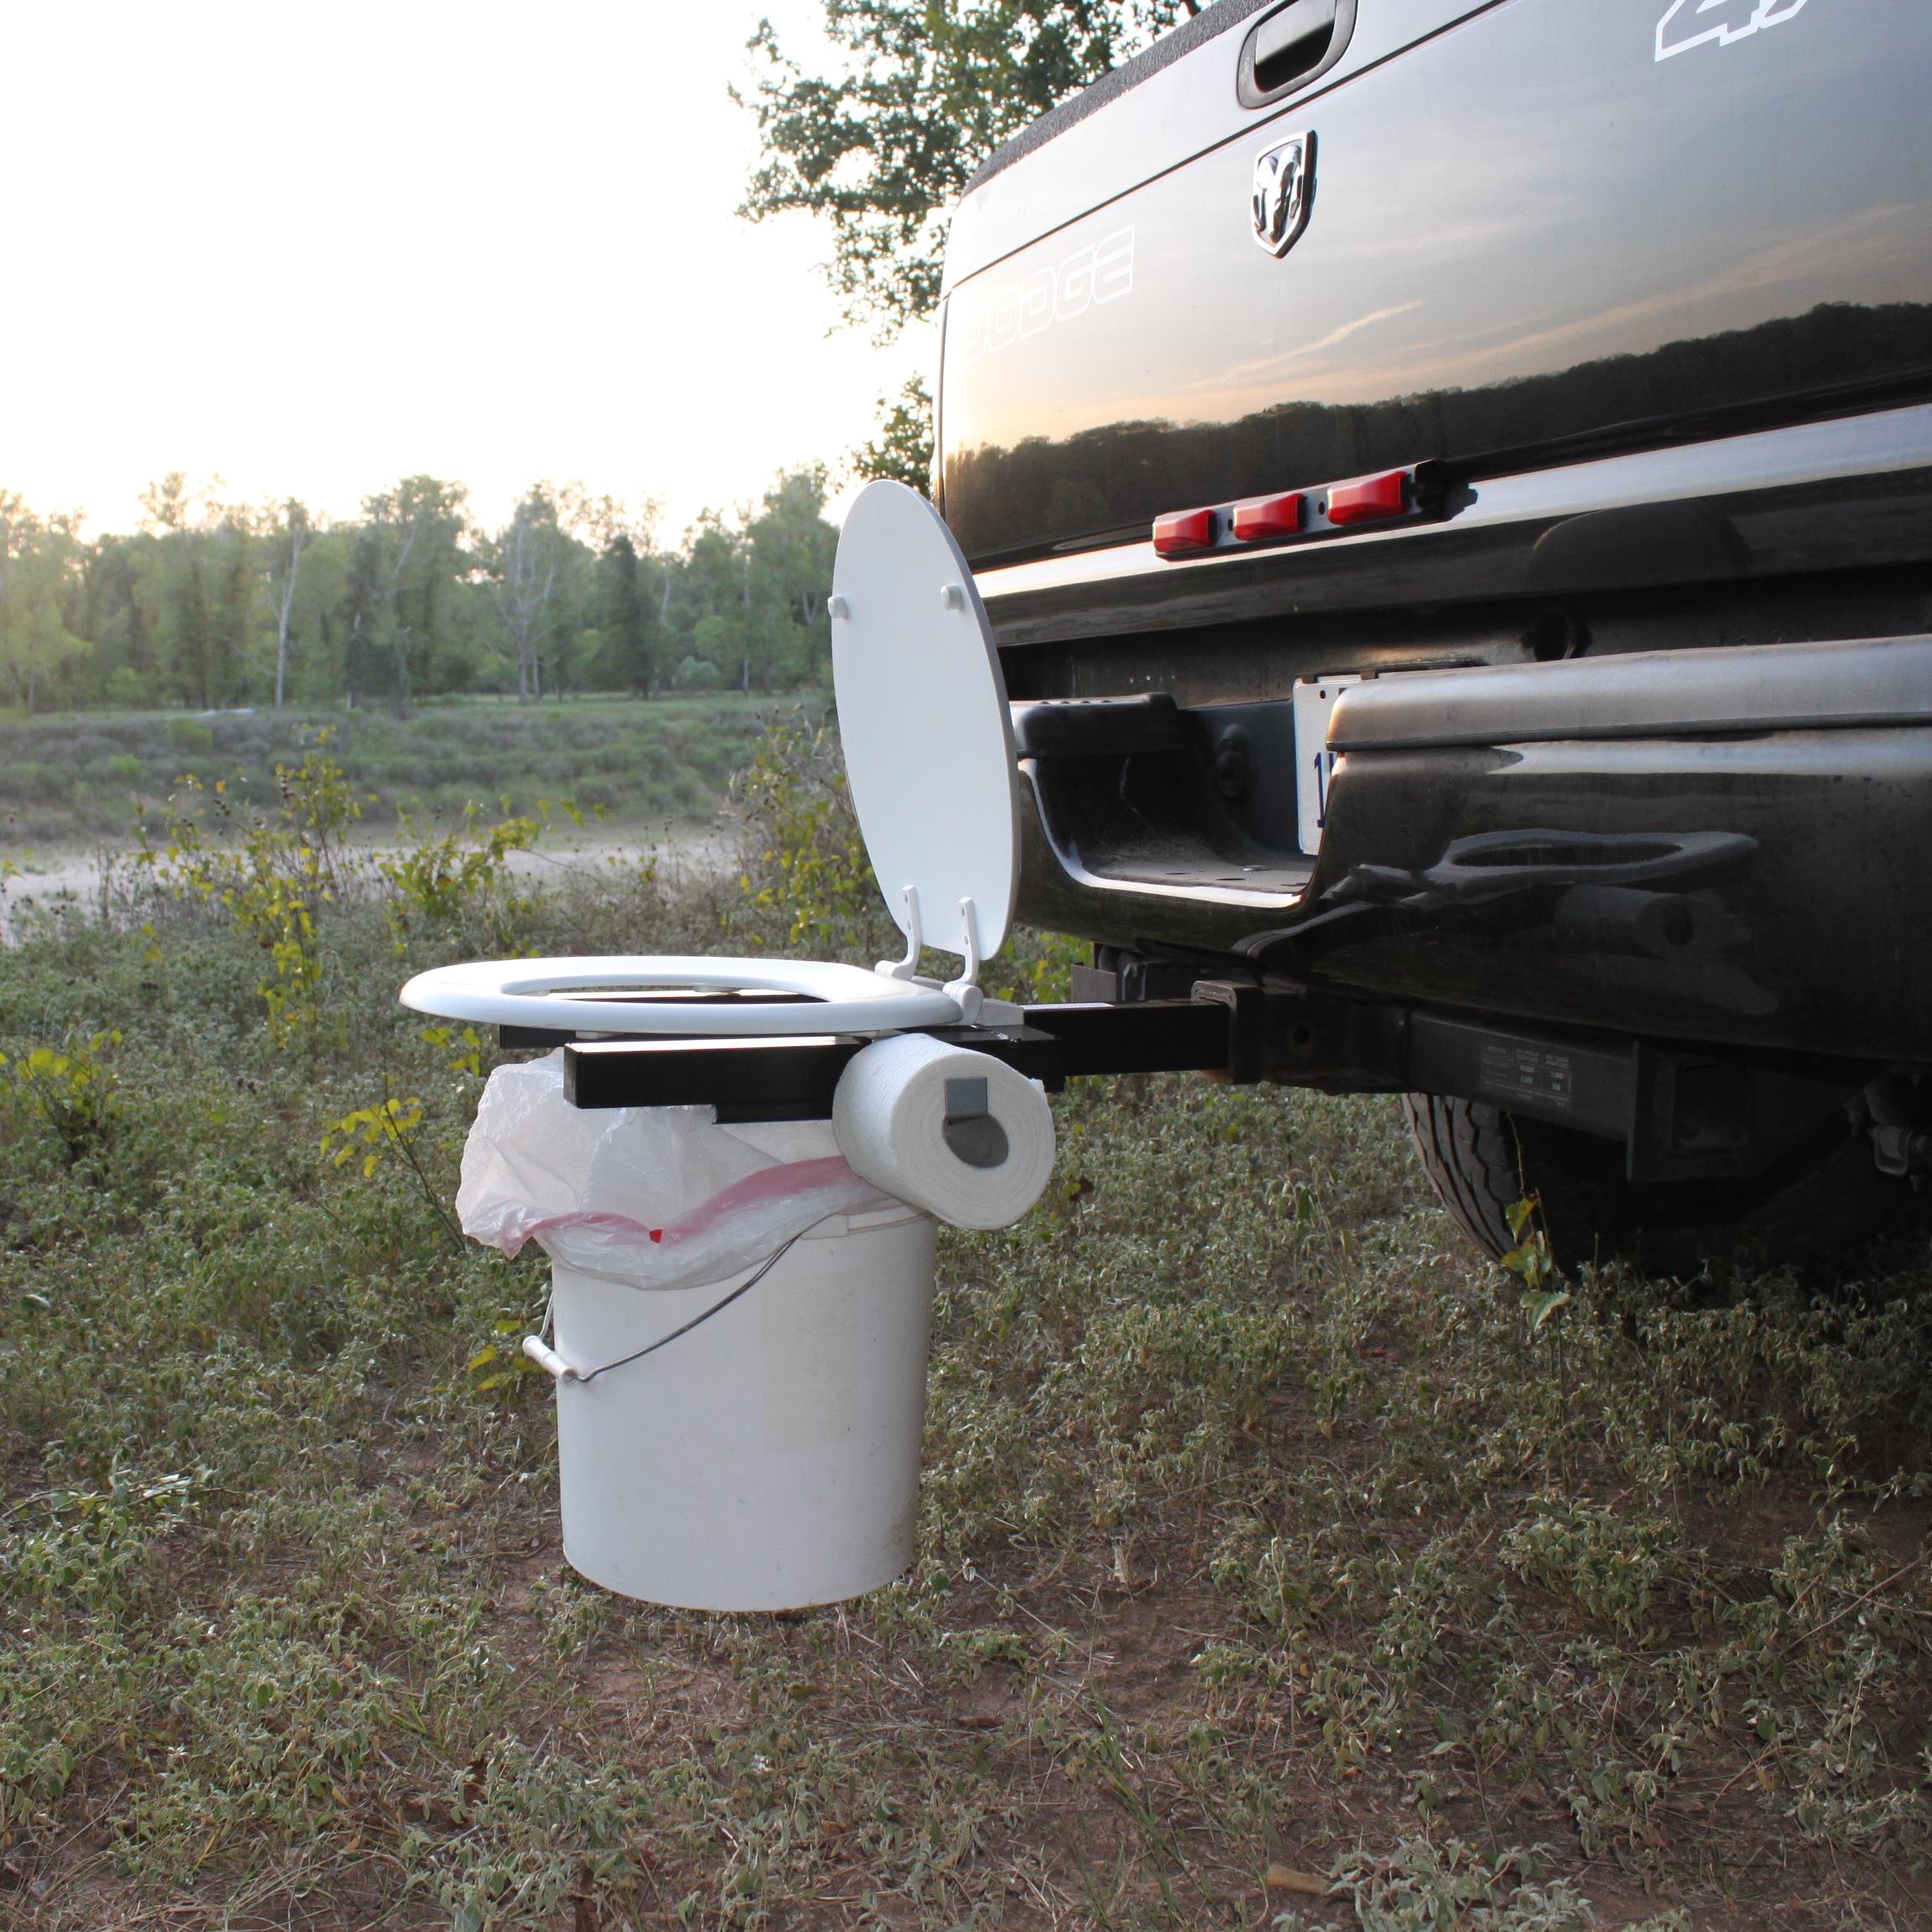 The Ultimate Portable toilet for the outdoors.
Hunting, Fishing, Camping, Off Road, Construction Sites, Emergency/Disaster situations, and more.